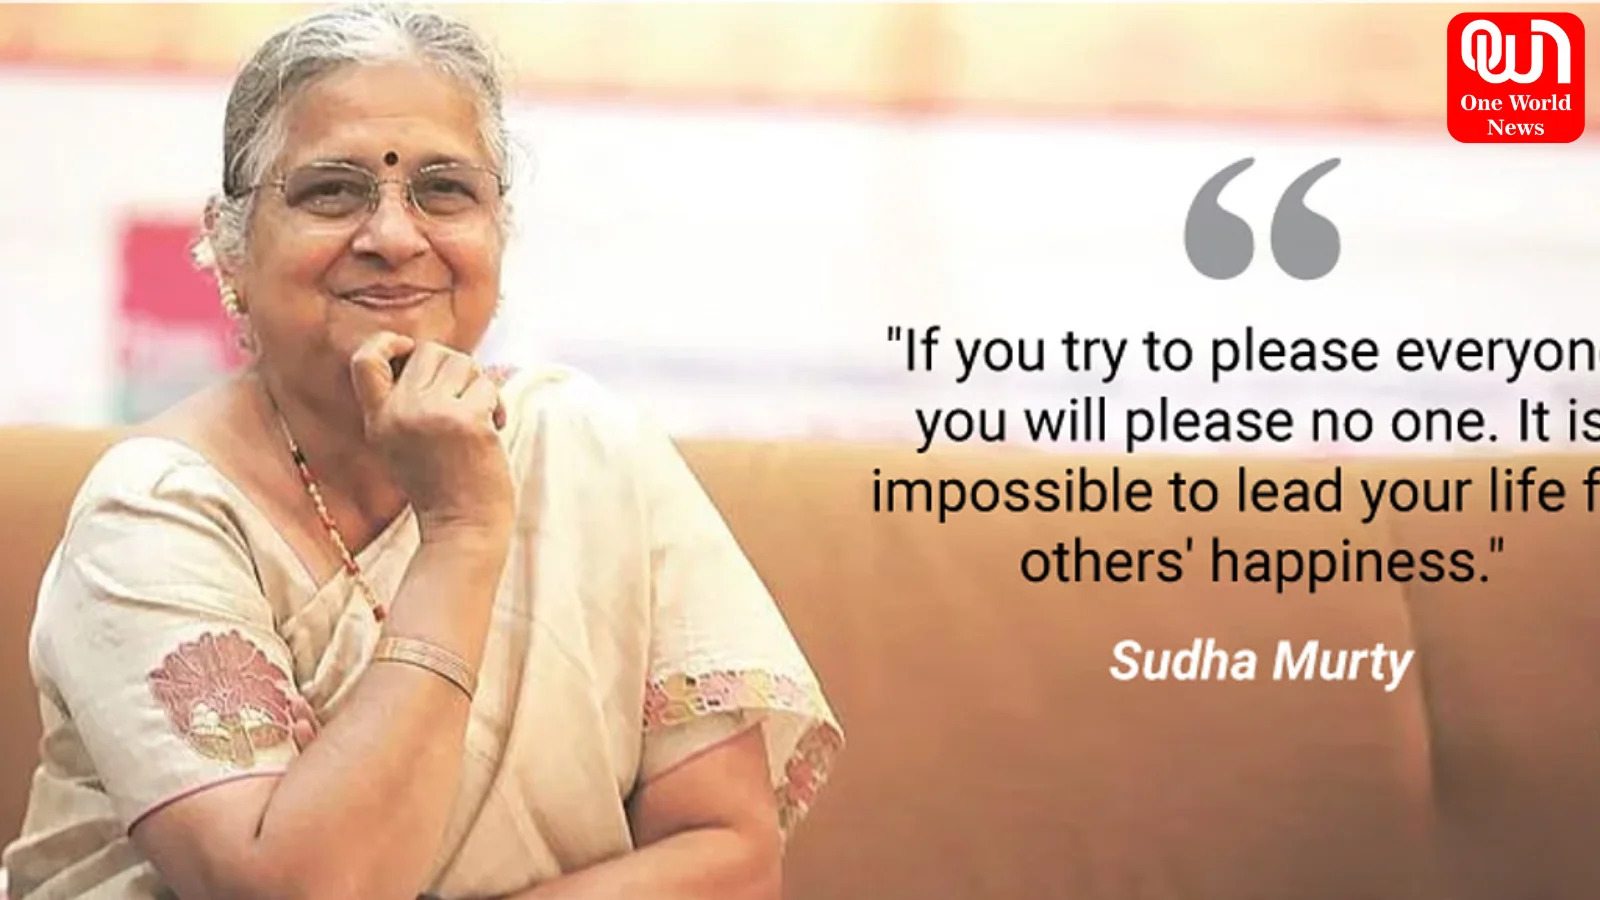 Top 10 Motivational And Inspirational Quotes By Sudha Murthy To ...